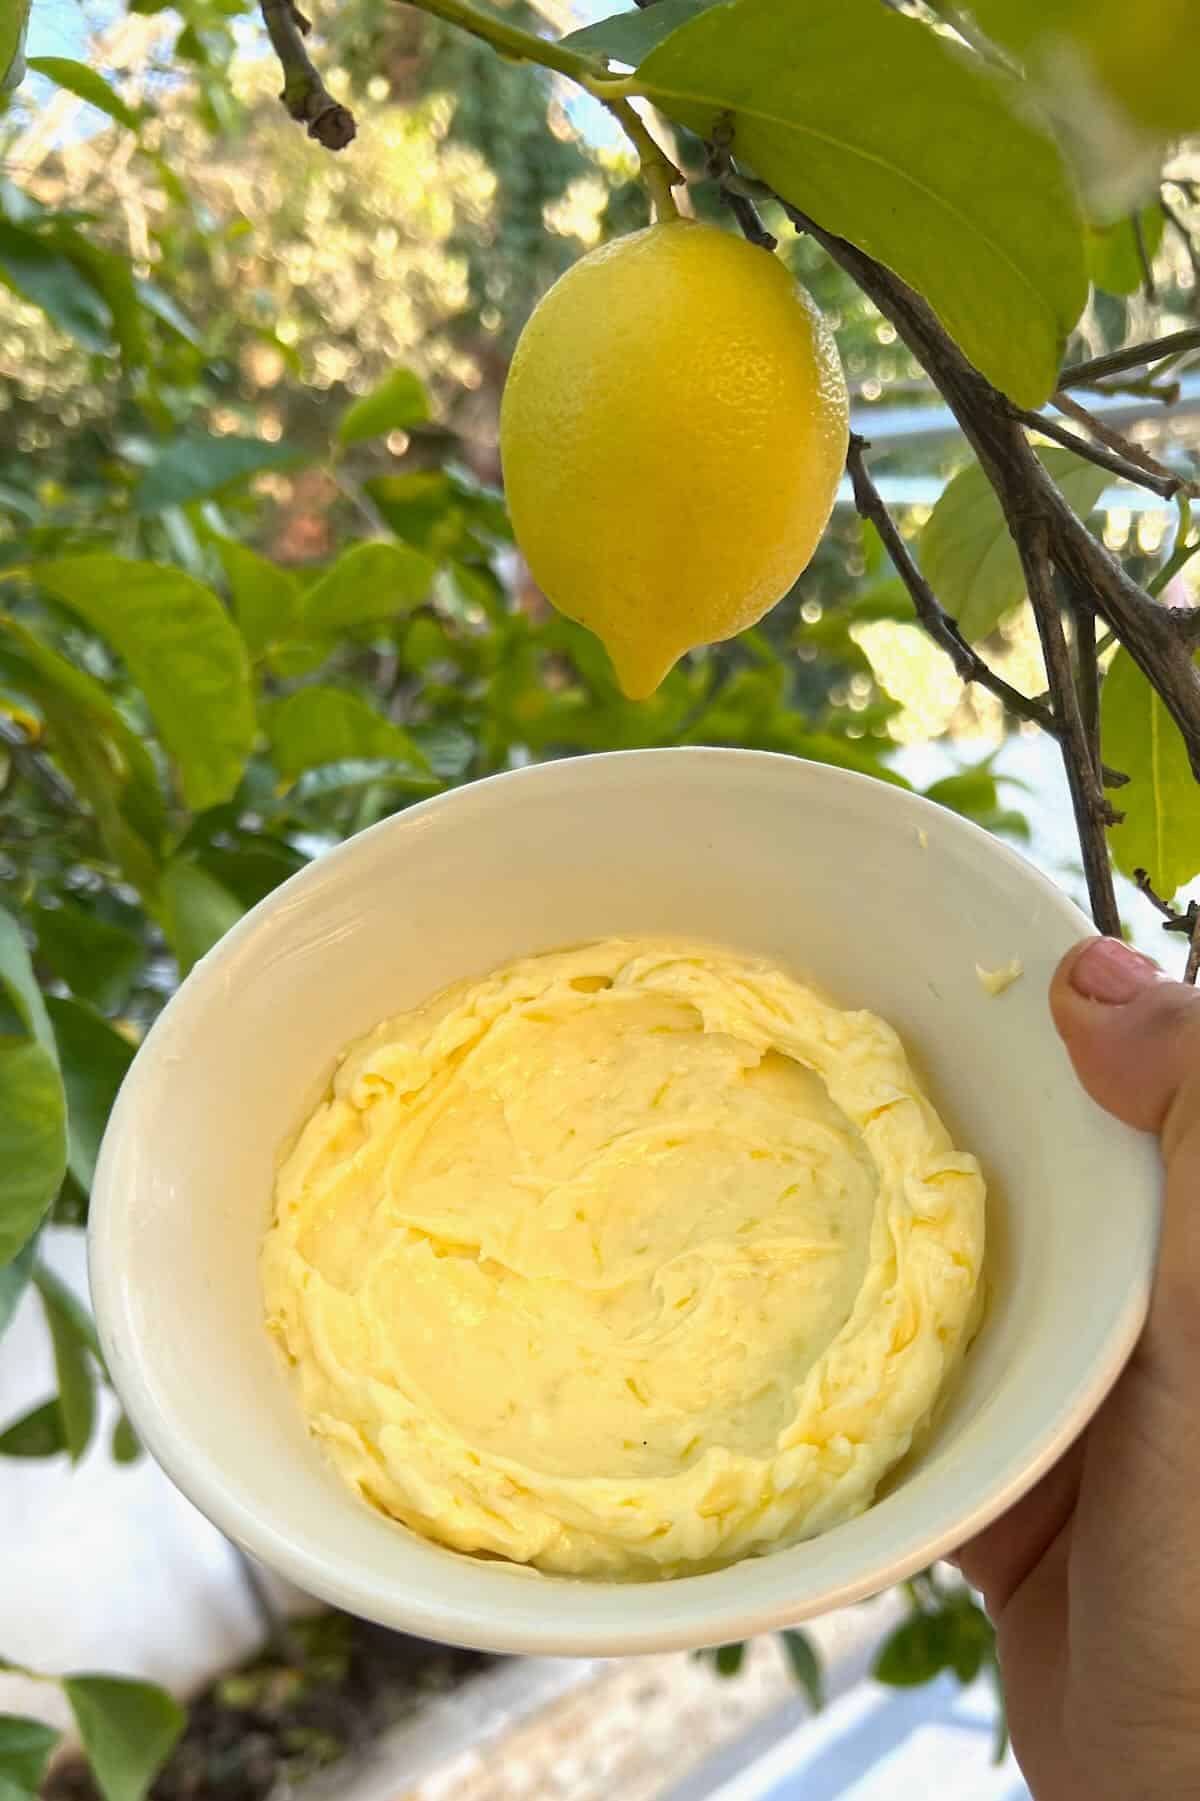 A lemon and a bowl with lemon butter